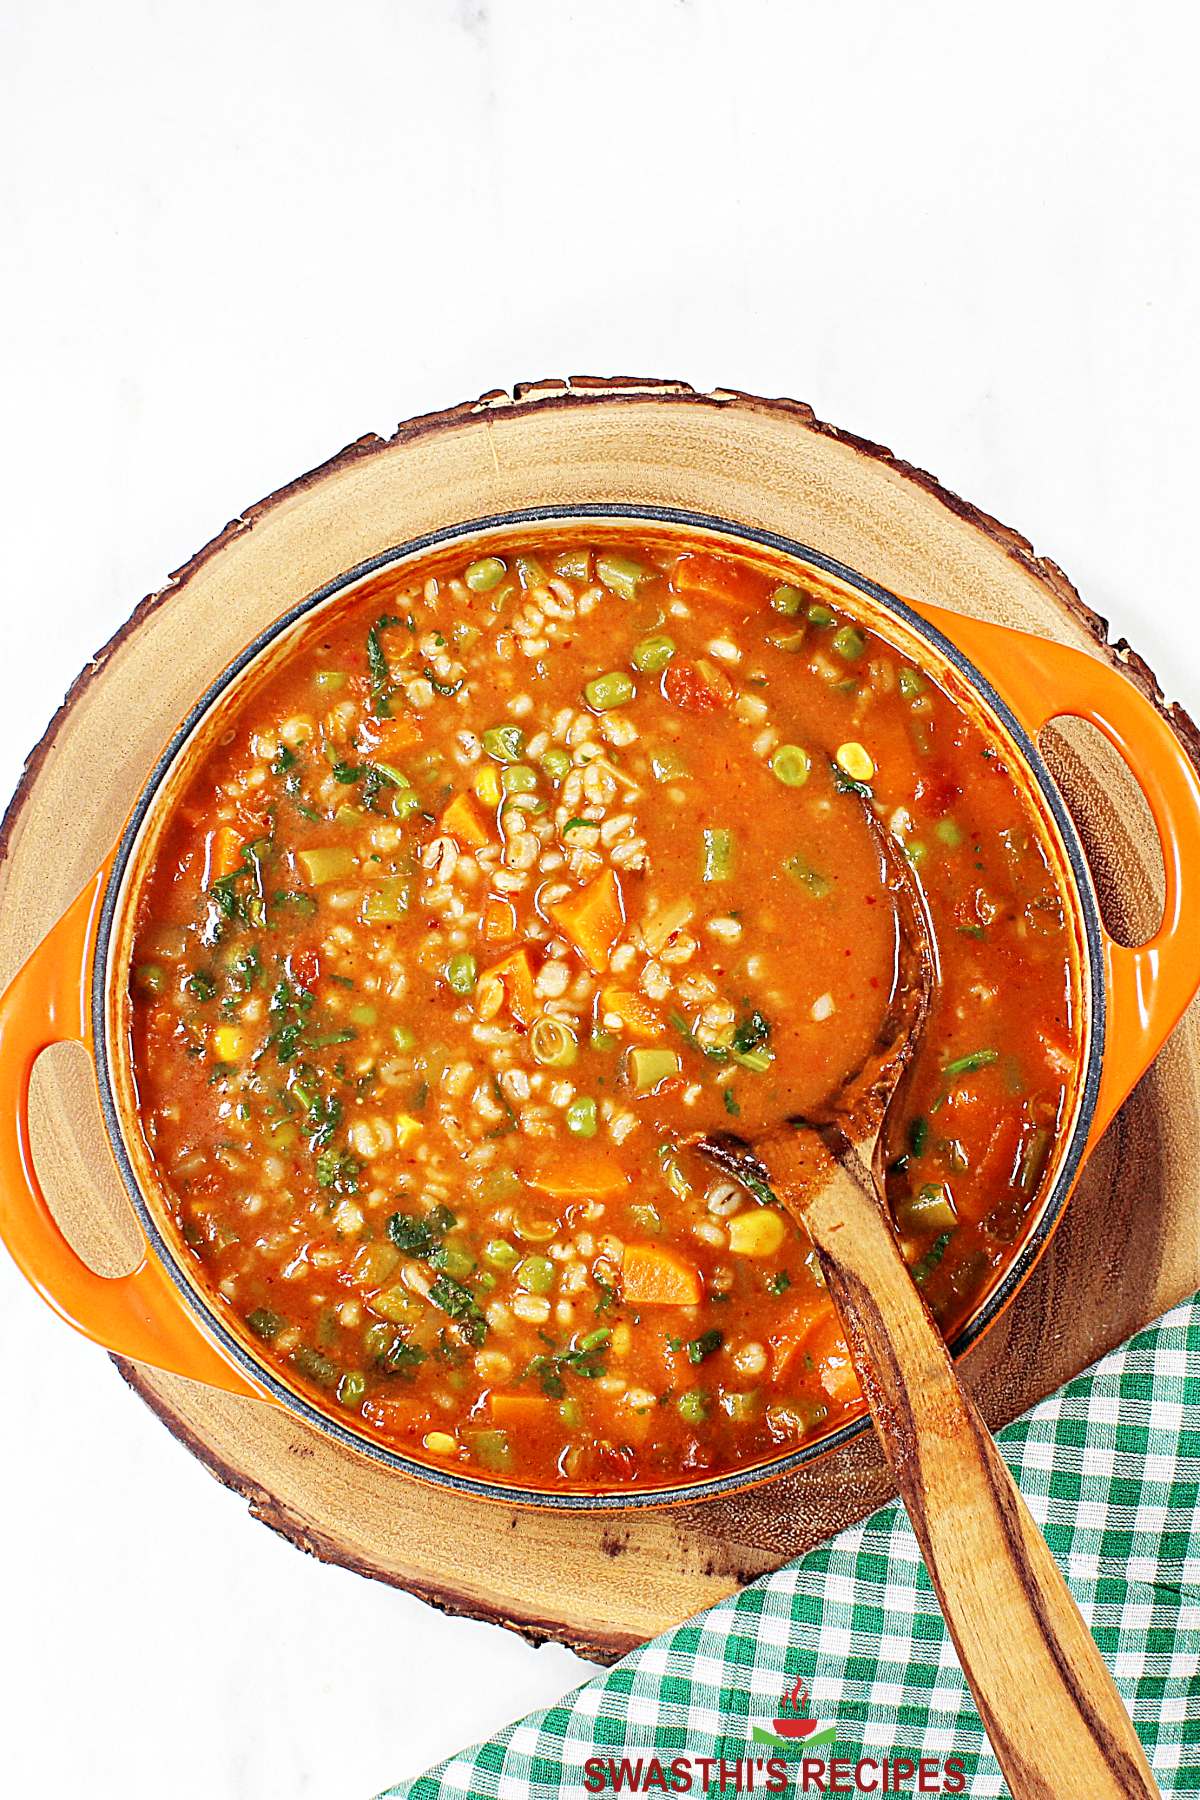 Barley soup made with pearl barley, vegetables and curry powder